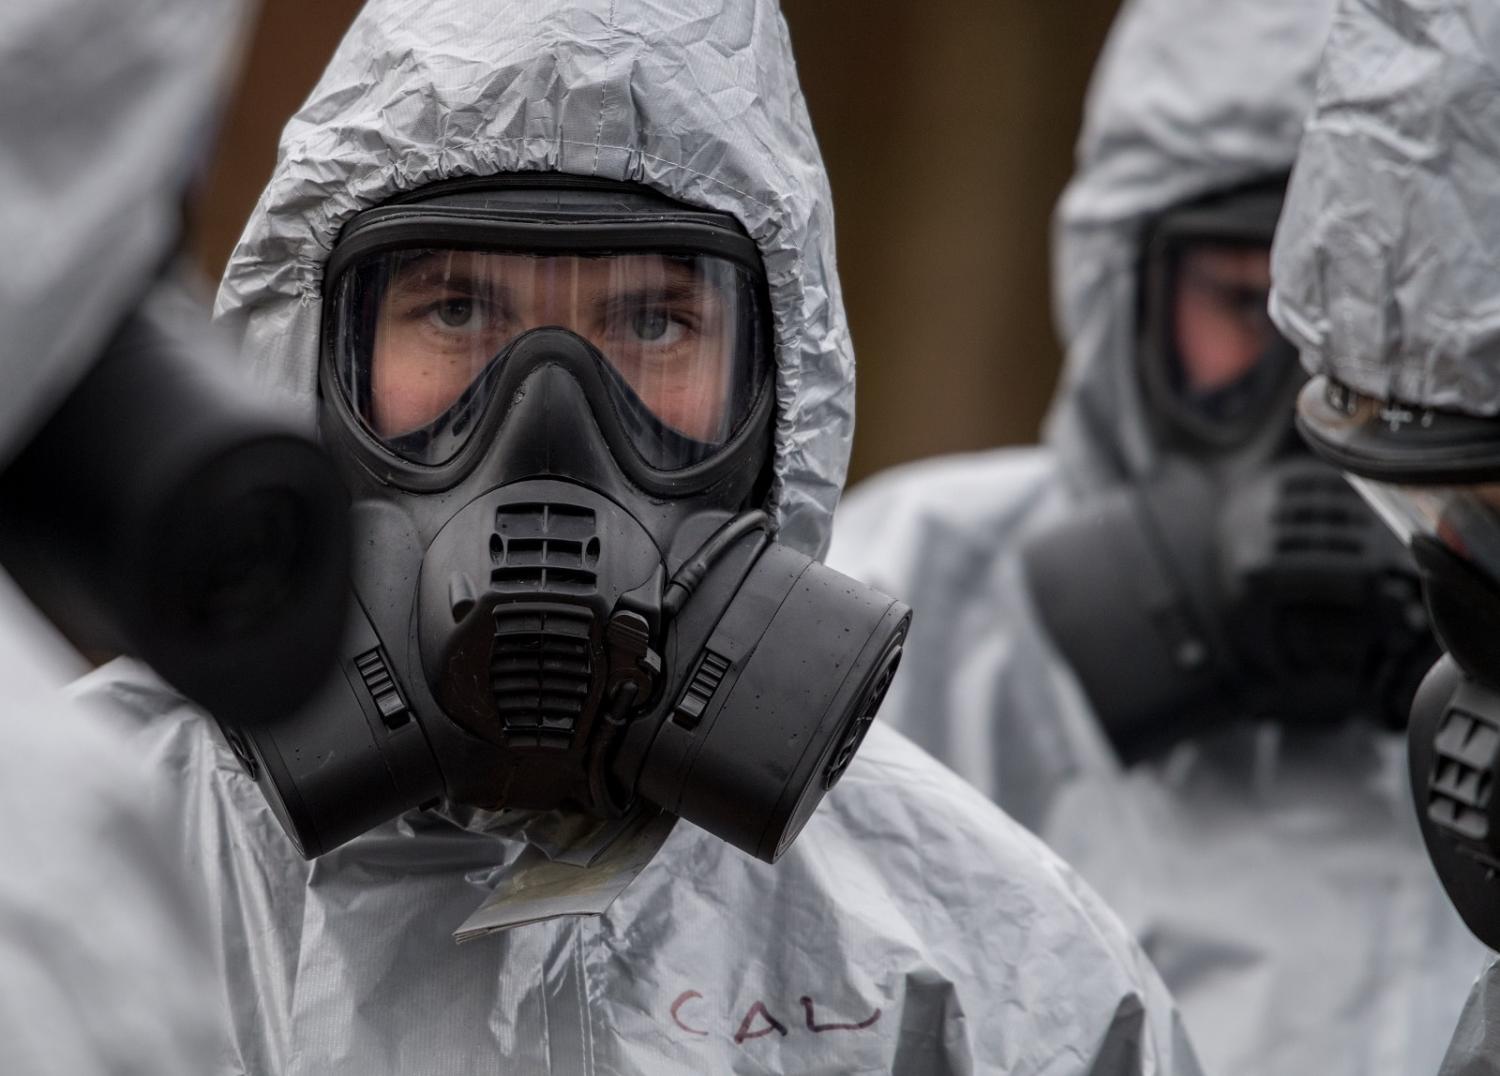 Military personnel wear protective suits as they investigate the poisoning of Sergei Skripal on 11 March 2018 in Salisbury, England (Chris J Ratcliffe/Getty Images)